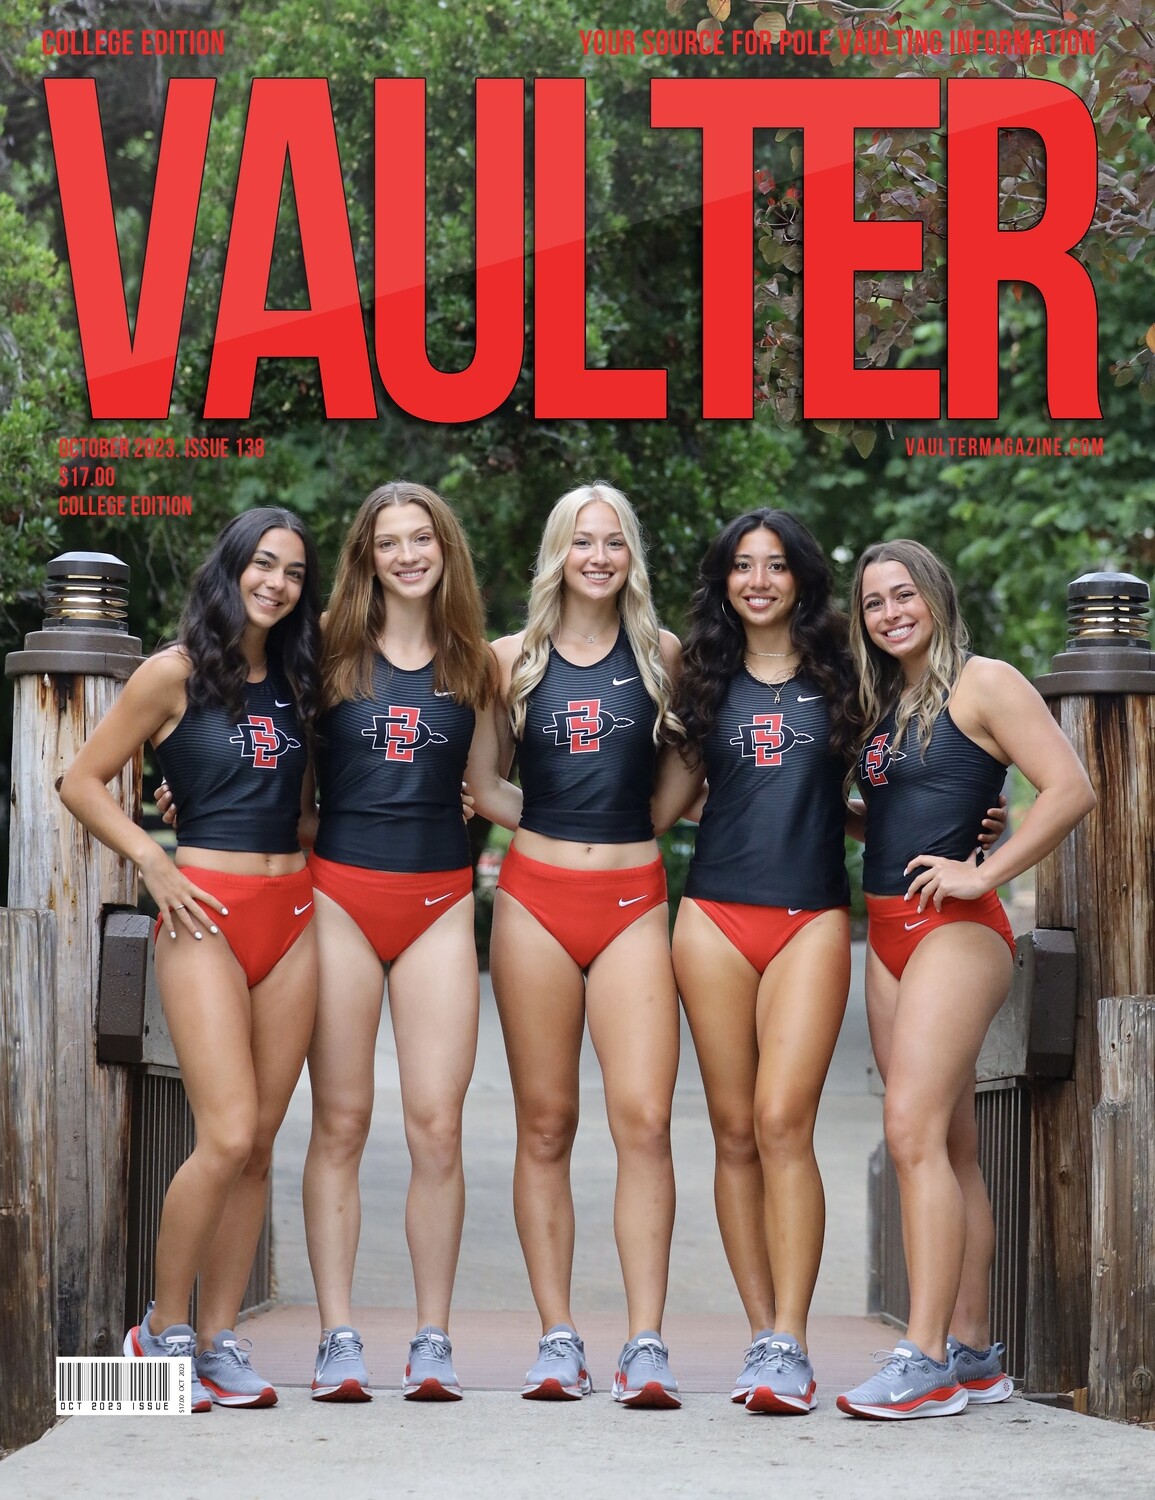 October 2023 San Diego State Issue of Vaulter Magazine U.S. Standard Mail